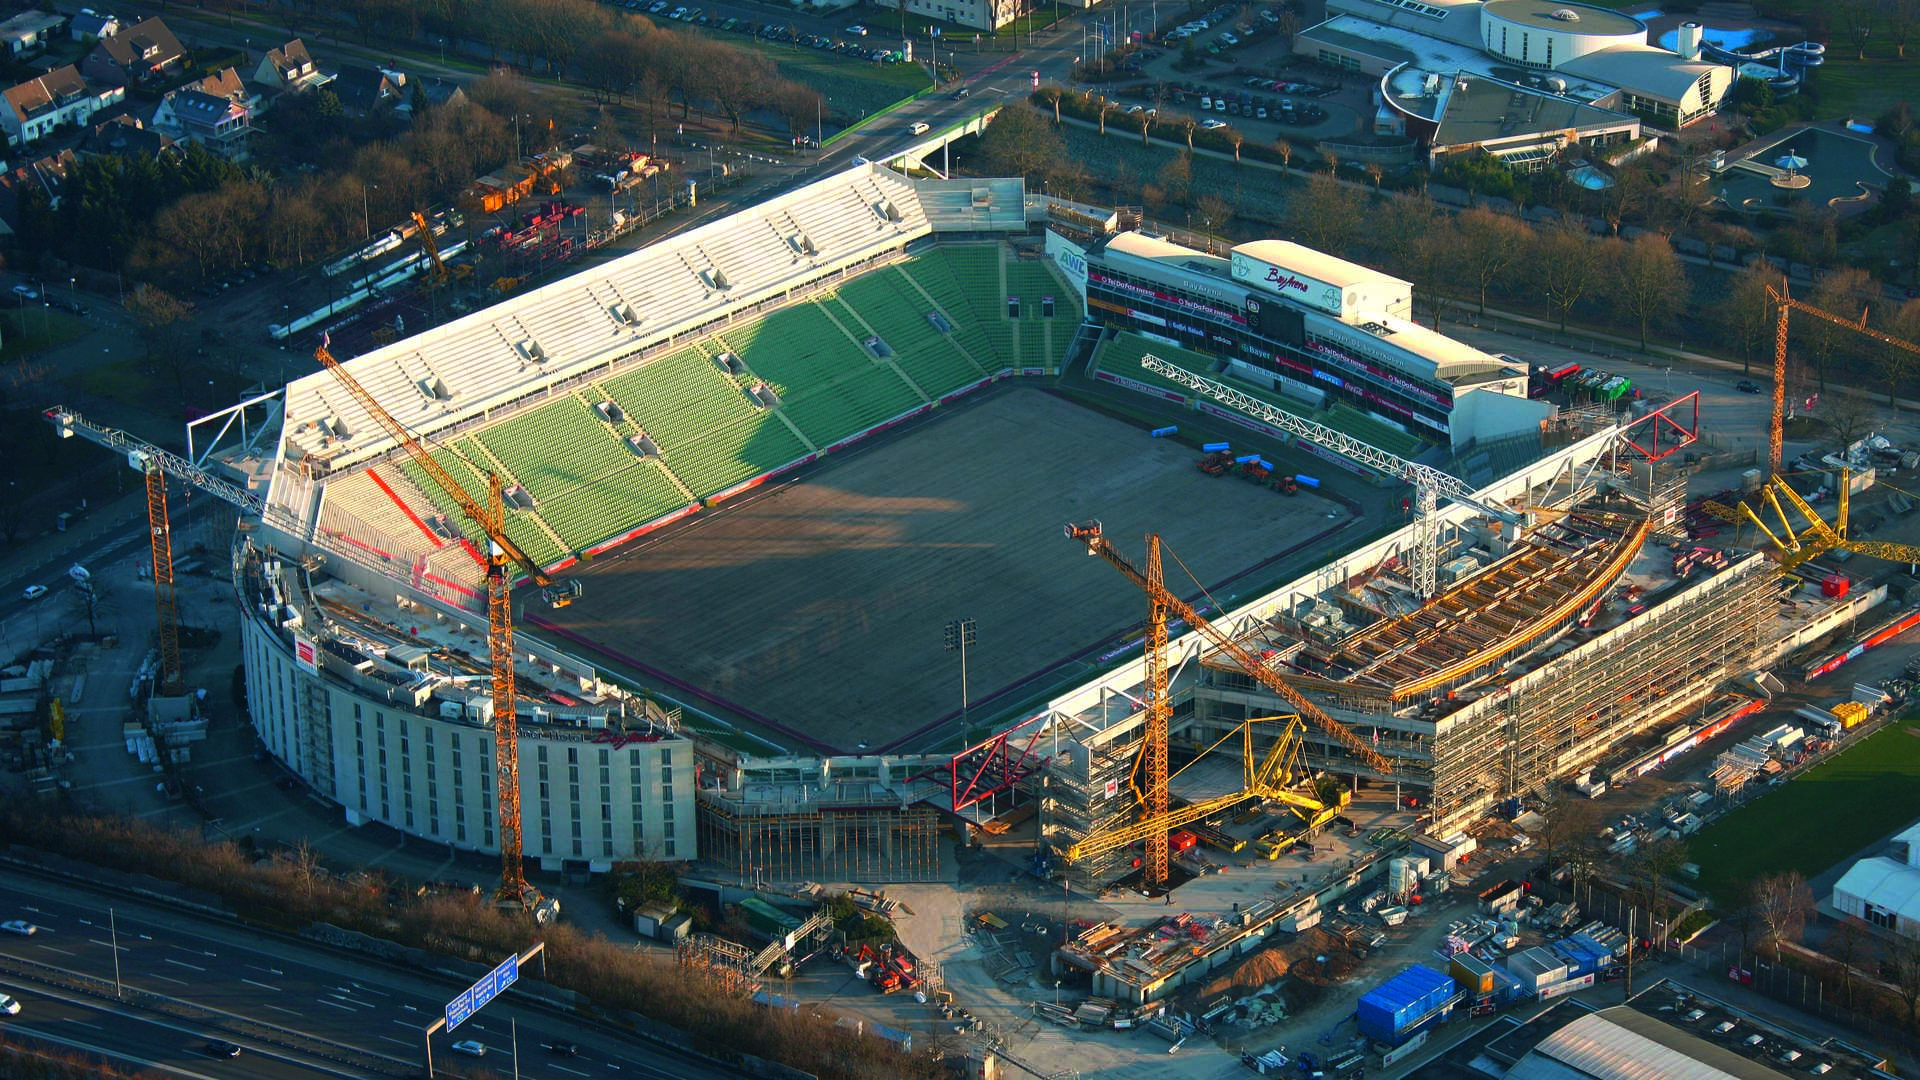 The BayArena during the renovation in 2009